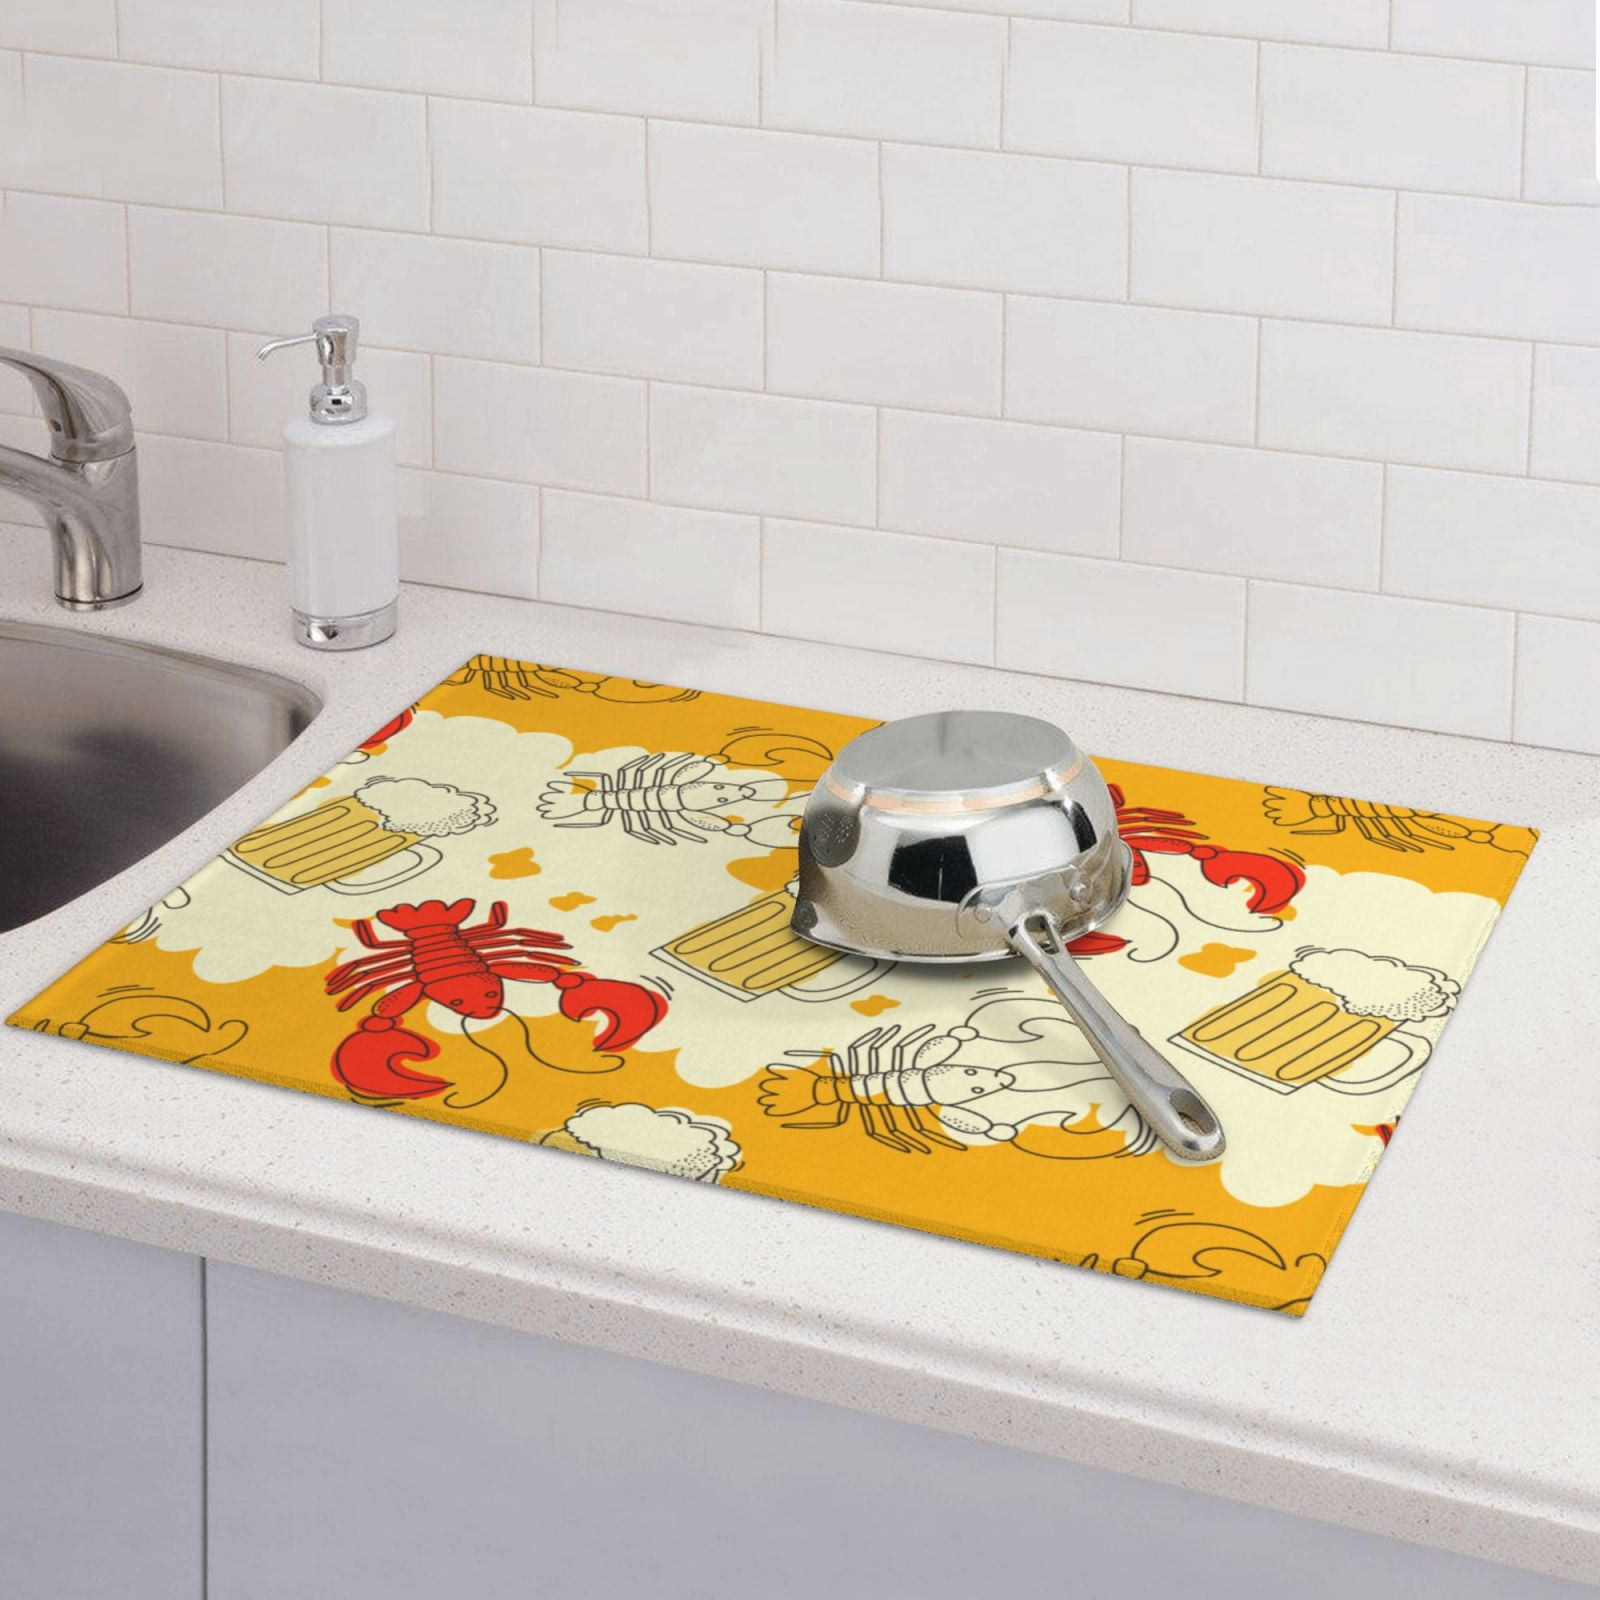 Mom Knows Best: The Original™ Dish Drying Mat